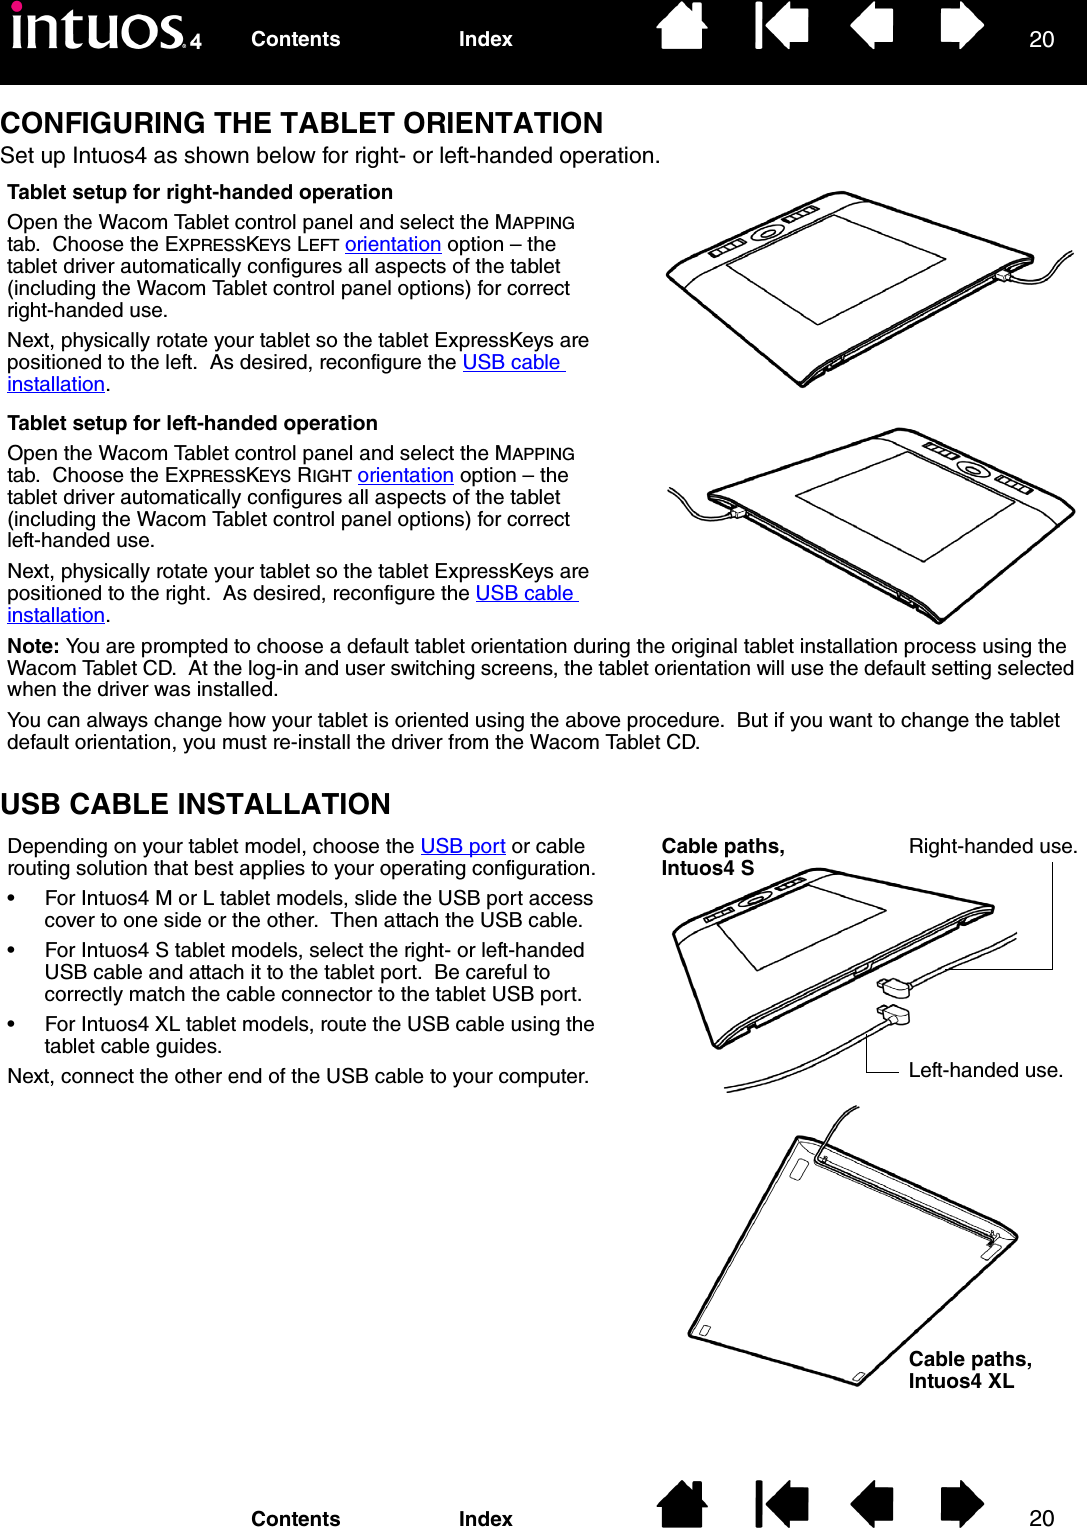 2020IndexContentsIndexContentsCONFIGURING THE TABLET ORIENTATIONSet up Intuos4 as shown below for right- or left-handed operation.USB CABLE INSTALLATIONTablet setup for left-handed operationOpen the Wacom Tablet control panel and select the MAPPING tab.  Choose the EXPRESSKEYS RIGHT orientation option – the tablet driver automatically configures all aspects of the tablet (including the Wacom Tablet control panel options) for correct left-handed use.Next, physically rotate your tablet so the tablet ExpressKeys are positioned to the right.  As desired, reconfigure the USB cable installation.Tablet setup for right-handed operationOpen the Wacom Tablet control panel and select the MAPPING tab.  Choose the EXPRESSKEYS LEFT orientation option – the tablet driver automatically configures all aspects of the tablet (including the Wacom Tablet control panel options) for correct right-handed use.Next, physically rotate your tablet so the tablet ExpressKeys are positioned to the left.  As desired, reconfigure the USB cable installation.Note: You are prompted to choose a default tablet orientation during the original tablet installation process using the Wacom Tablet CD.  At the log-in and user switching screens, the tablet orientation will use the default setting selected when the driver was installed.You can always change how your tablet is oriented using the above procedure.  But if you want to change the tablet default orientation, you must re-install the driver from the Wacom Tablet CD.Depending on your tablet model, choose the USB port or cable routing solution that best applies to your operating configuration.• For Intuos4 M or L tablet models, slide the USB port access cover to one side or the other.  Then attach the USB cable.• For Intuos4 S tablet models, select the right- or left-handed USB cable and attach it to the tablet port.  Be careful to correctly match the cable connector to the tablet USB port.• For Intuos4 XL tablet models, route the USB cable using the tablet cable guides.Next, connect the other end of the USB cable to your computer.Cable paths, Intuos4 SCable paths, Intuos4 XLRight-handed use.Left-handed use.